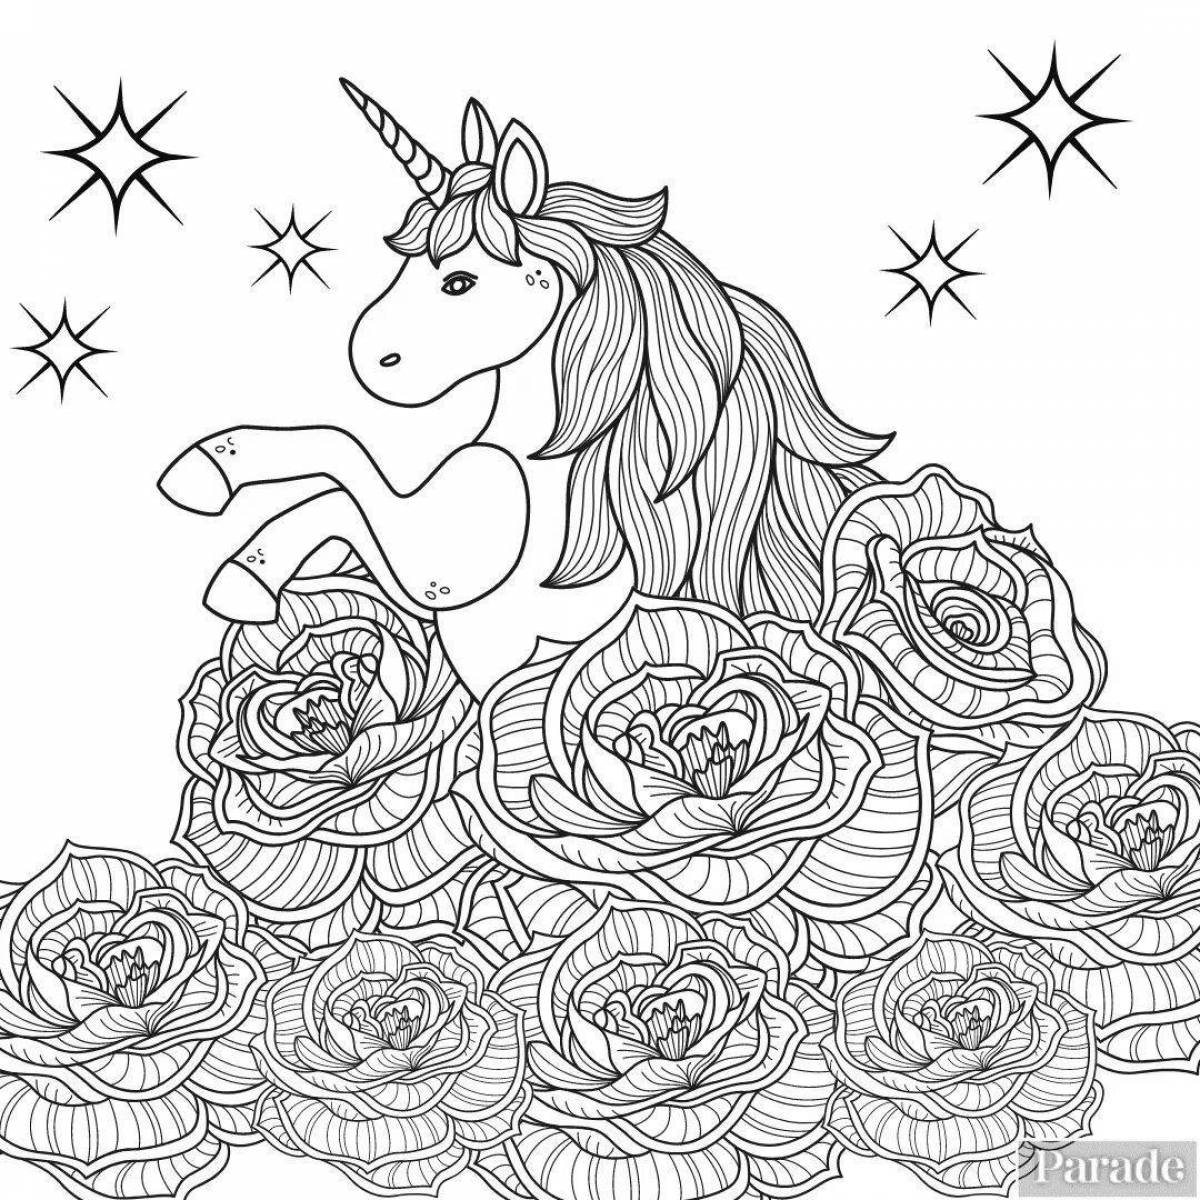 Coloring book for girls 7 years old unicorn